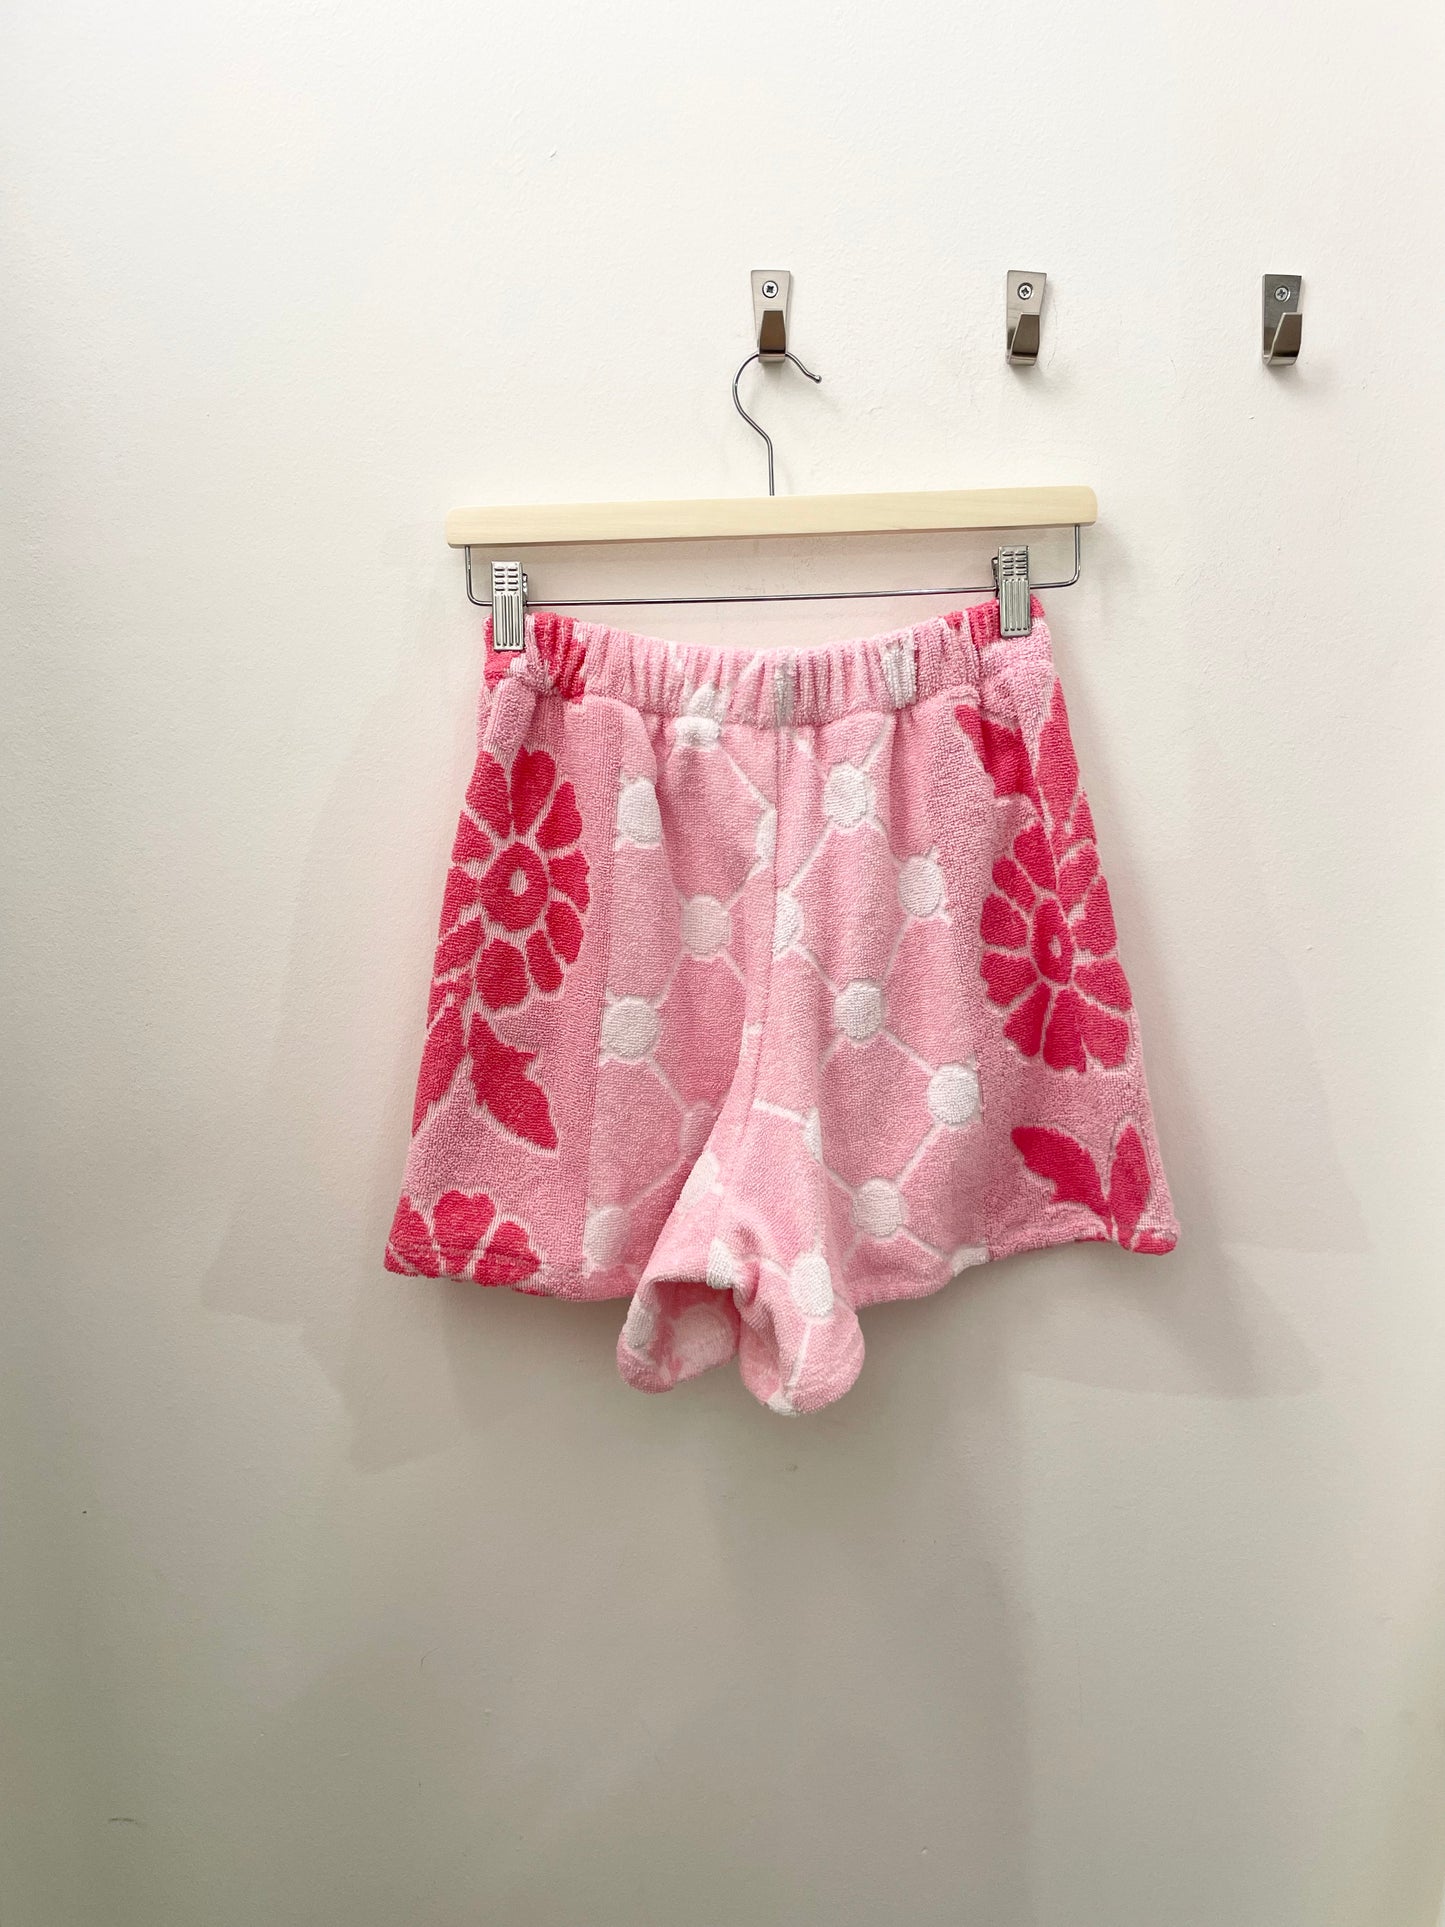 Frottee Shorts rose flower dream / M